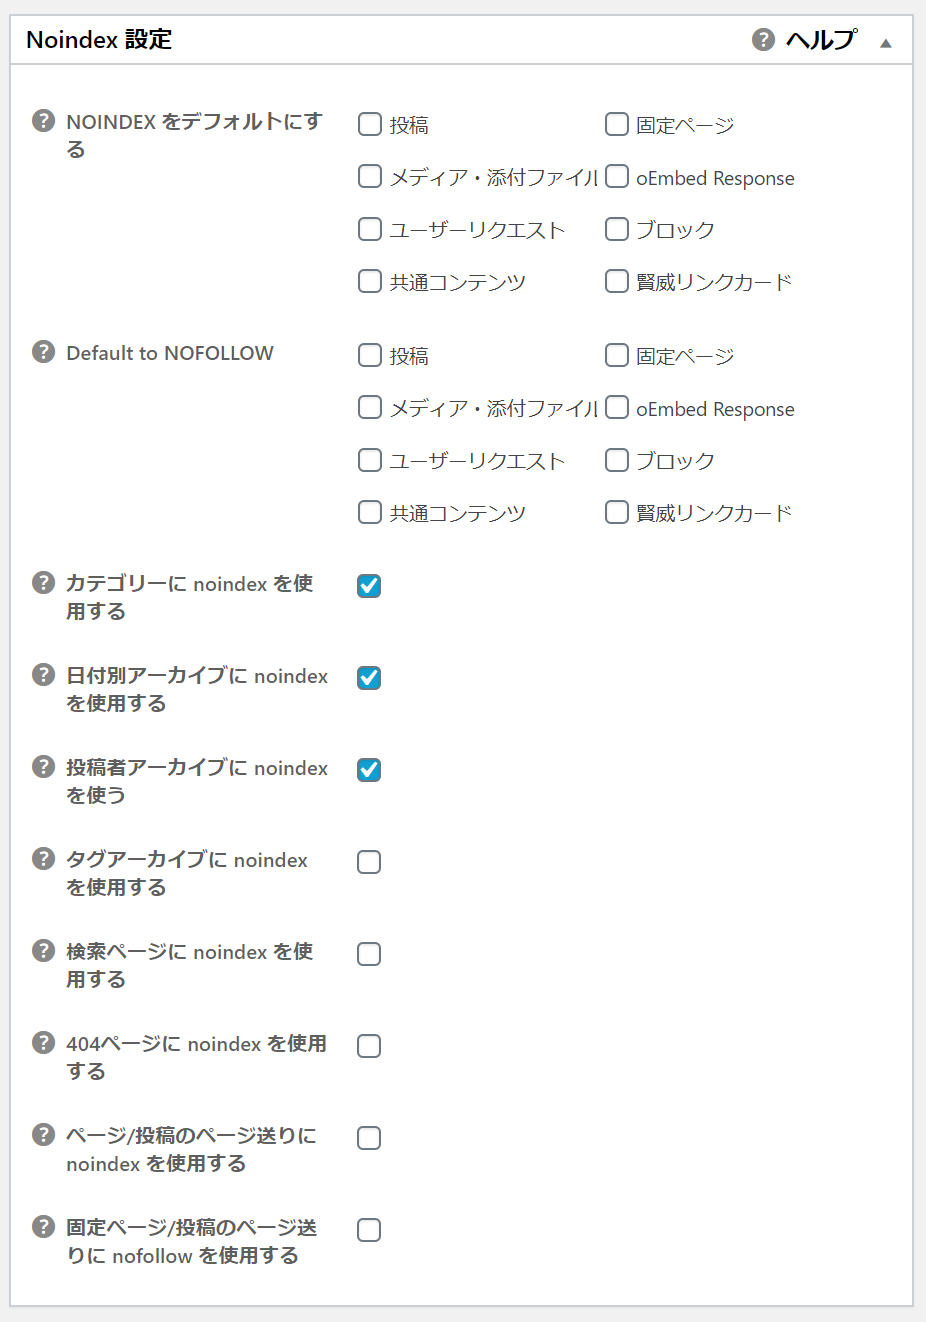 All in One SEO Packのnoindex設定